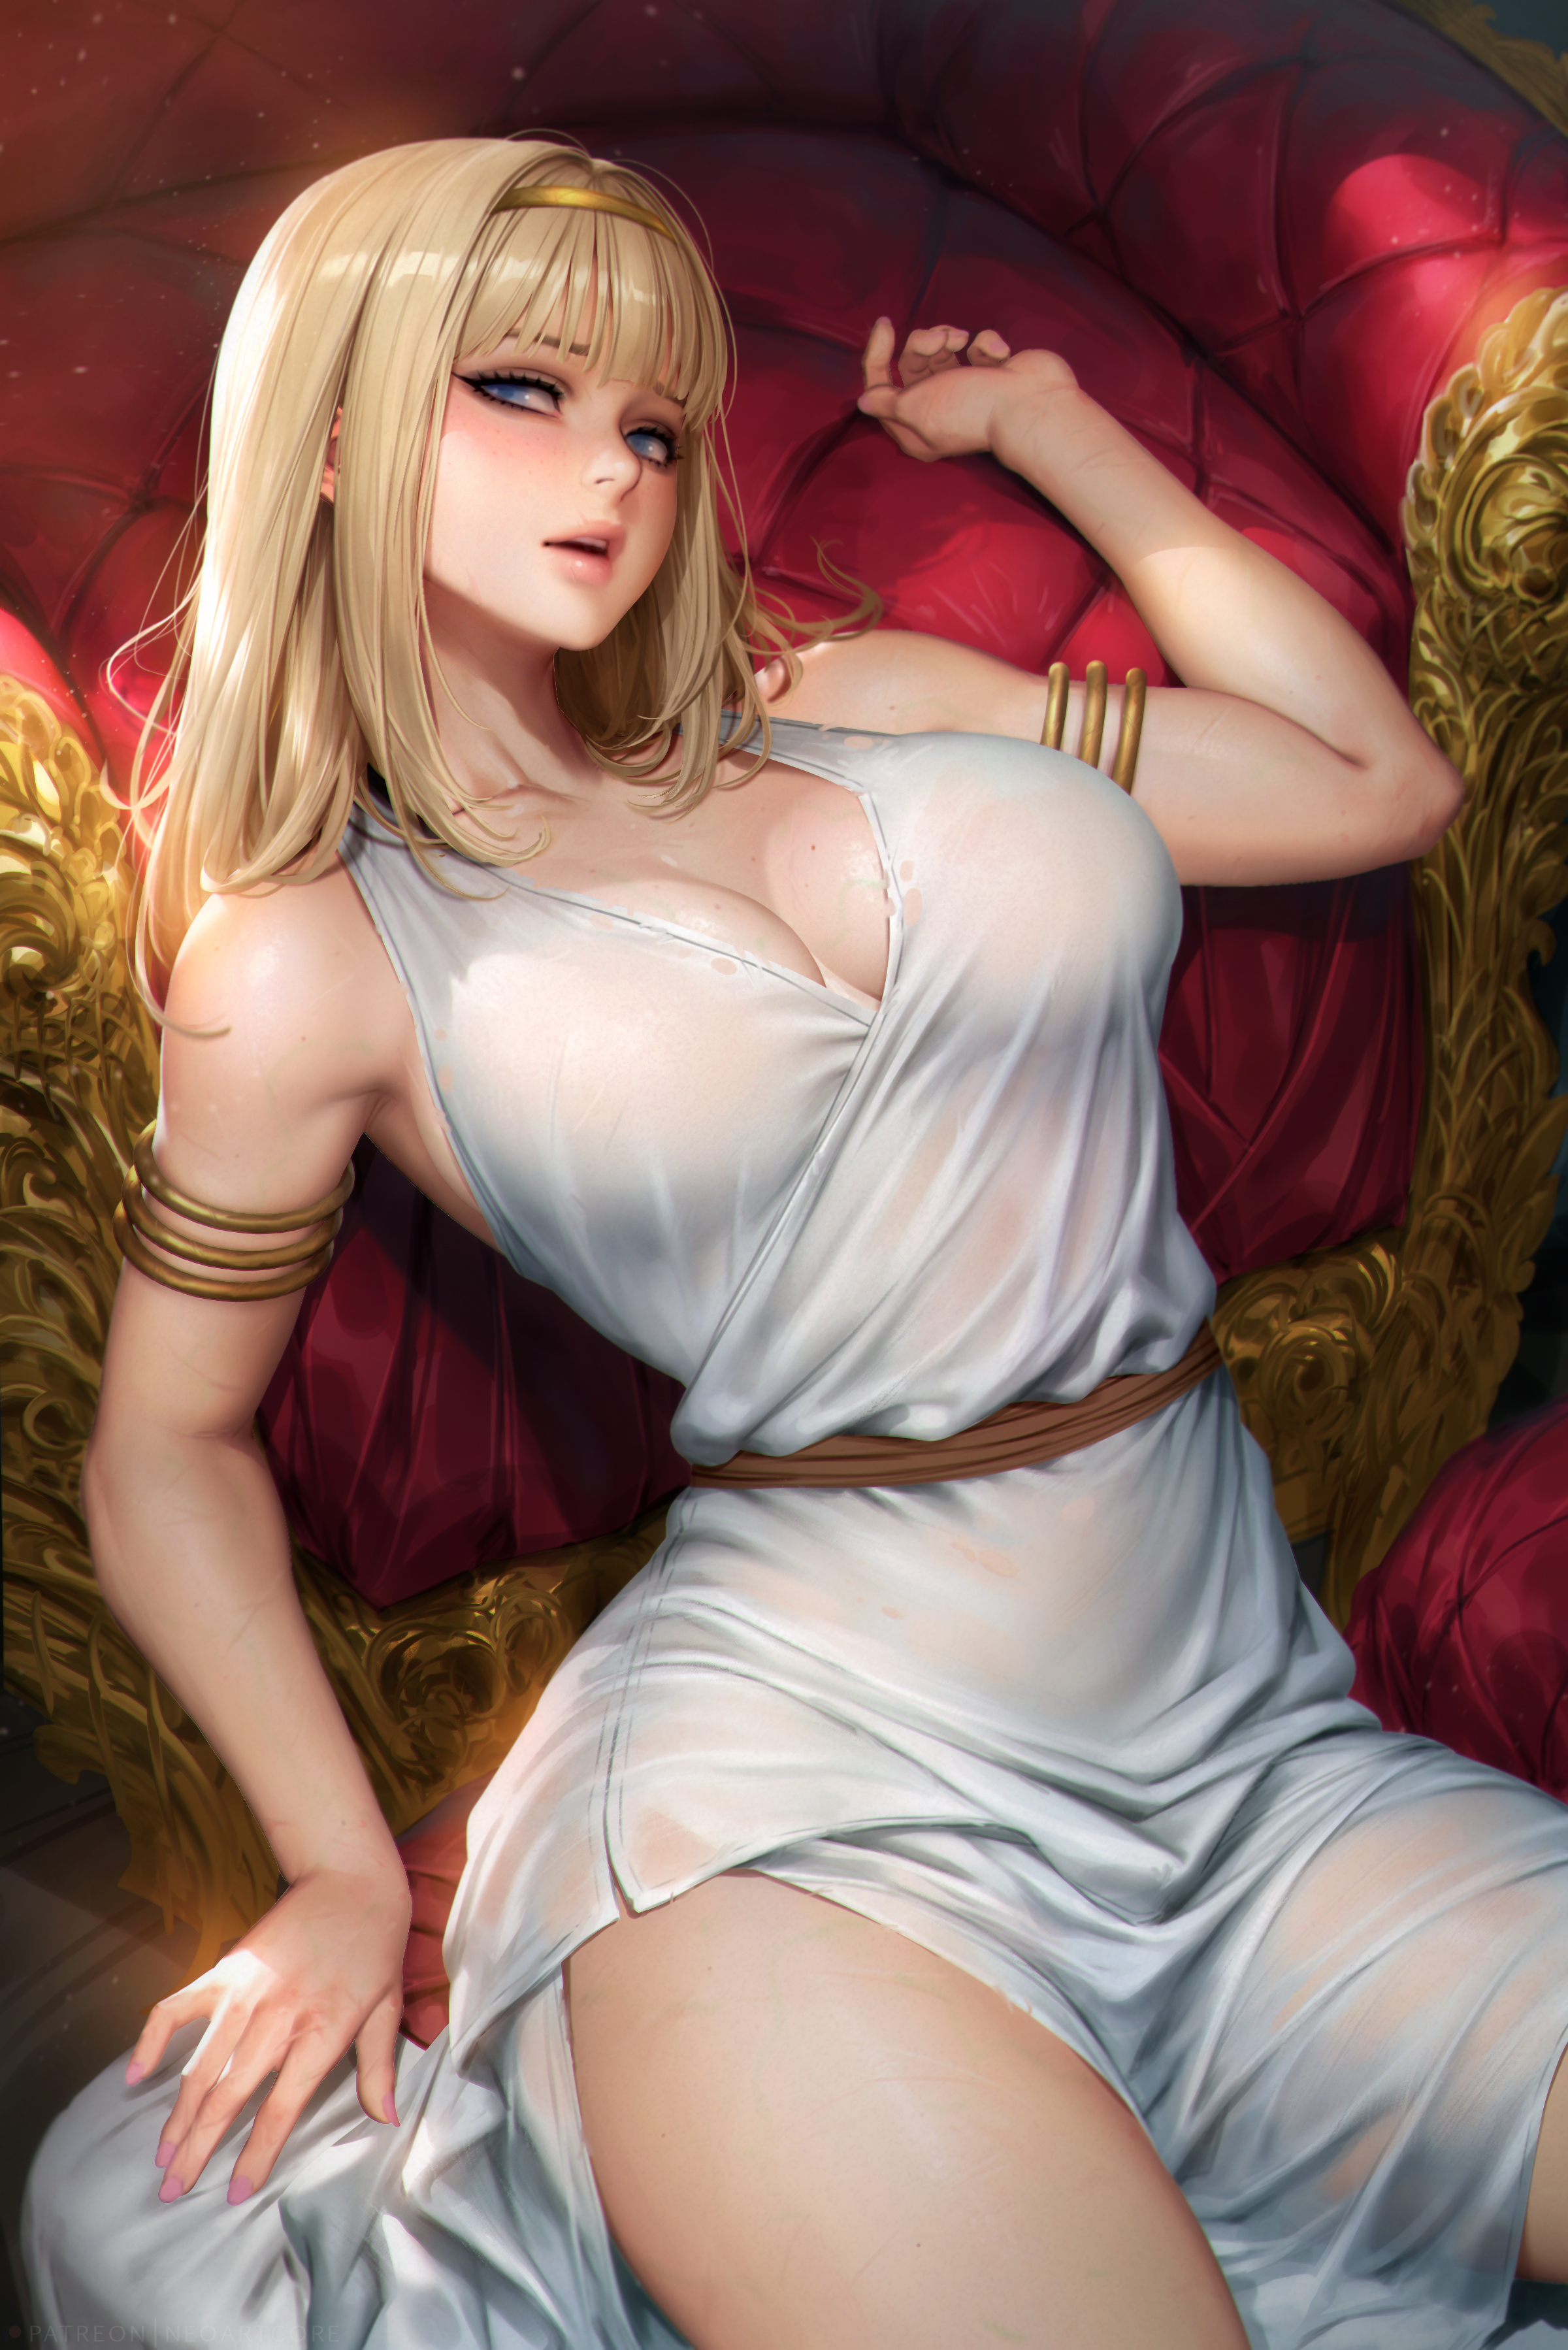 Anime 2400x3597 Shingeki no Kyojin anime anime girls artwork drawing fan art NeoArtCorE (artist) blonde Ymir Fritz looking at viewer portrait display parted lips dress shackles blunt bangs blue eyes watermarked bangs big boobs armchair arched back slim body belly belly button sunlight freckles long hair